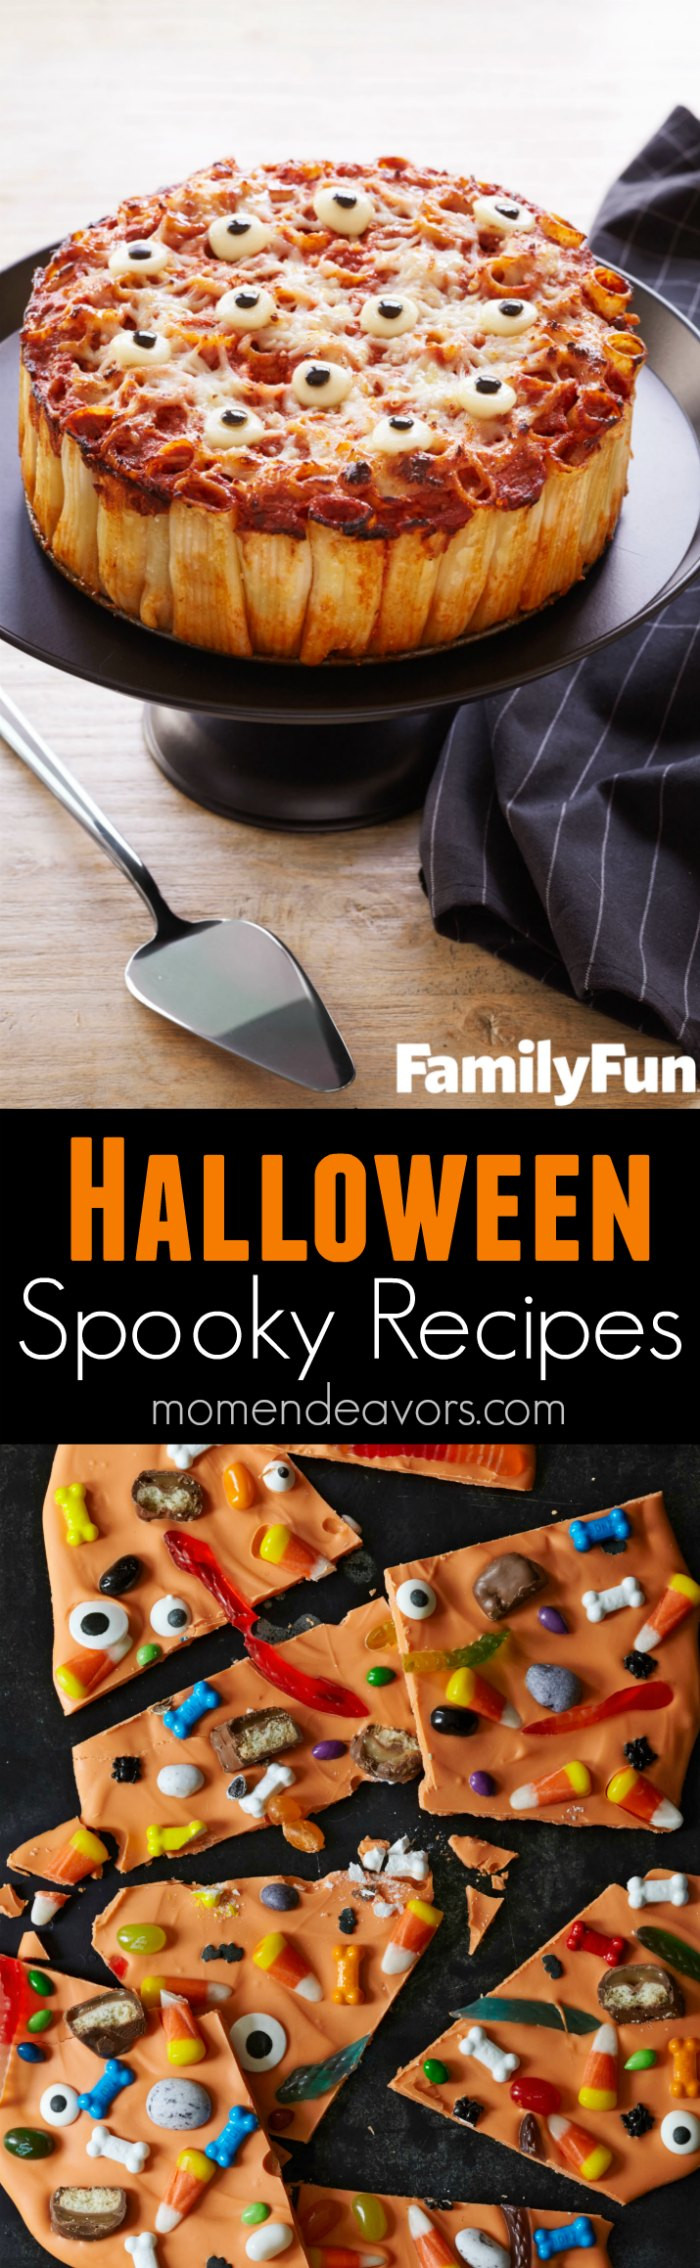 Spooky Party Food Ideas For Halloween
 Spooky Halloween Party Recipes